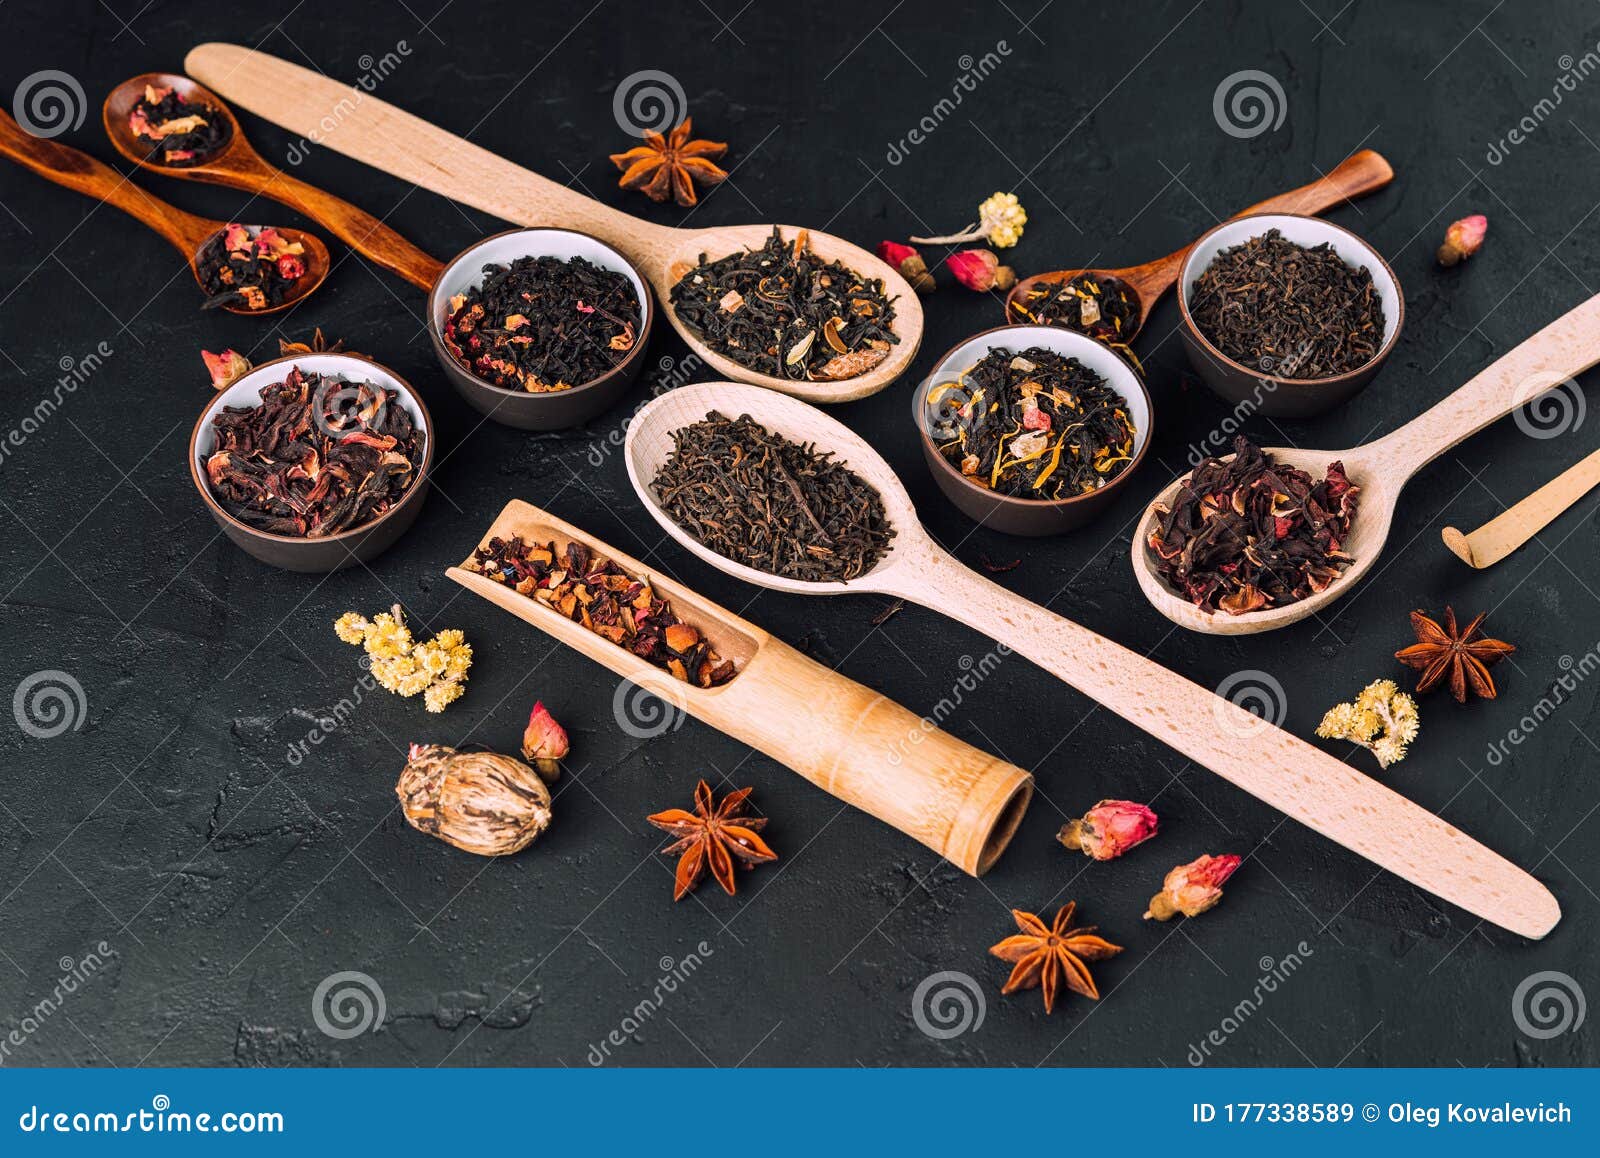 Assorted Dried Tea Leaves in Bowls and Wooden Spoons on a Concrete ...